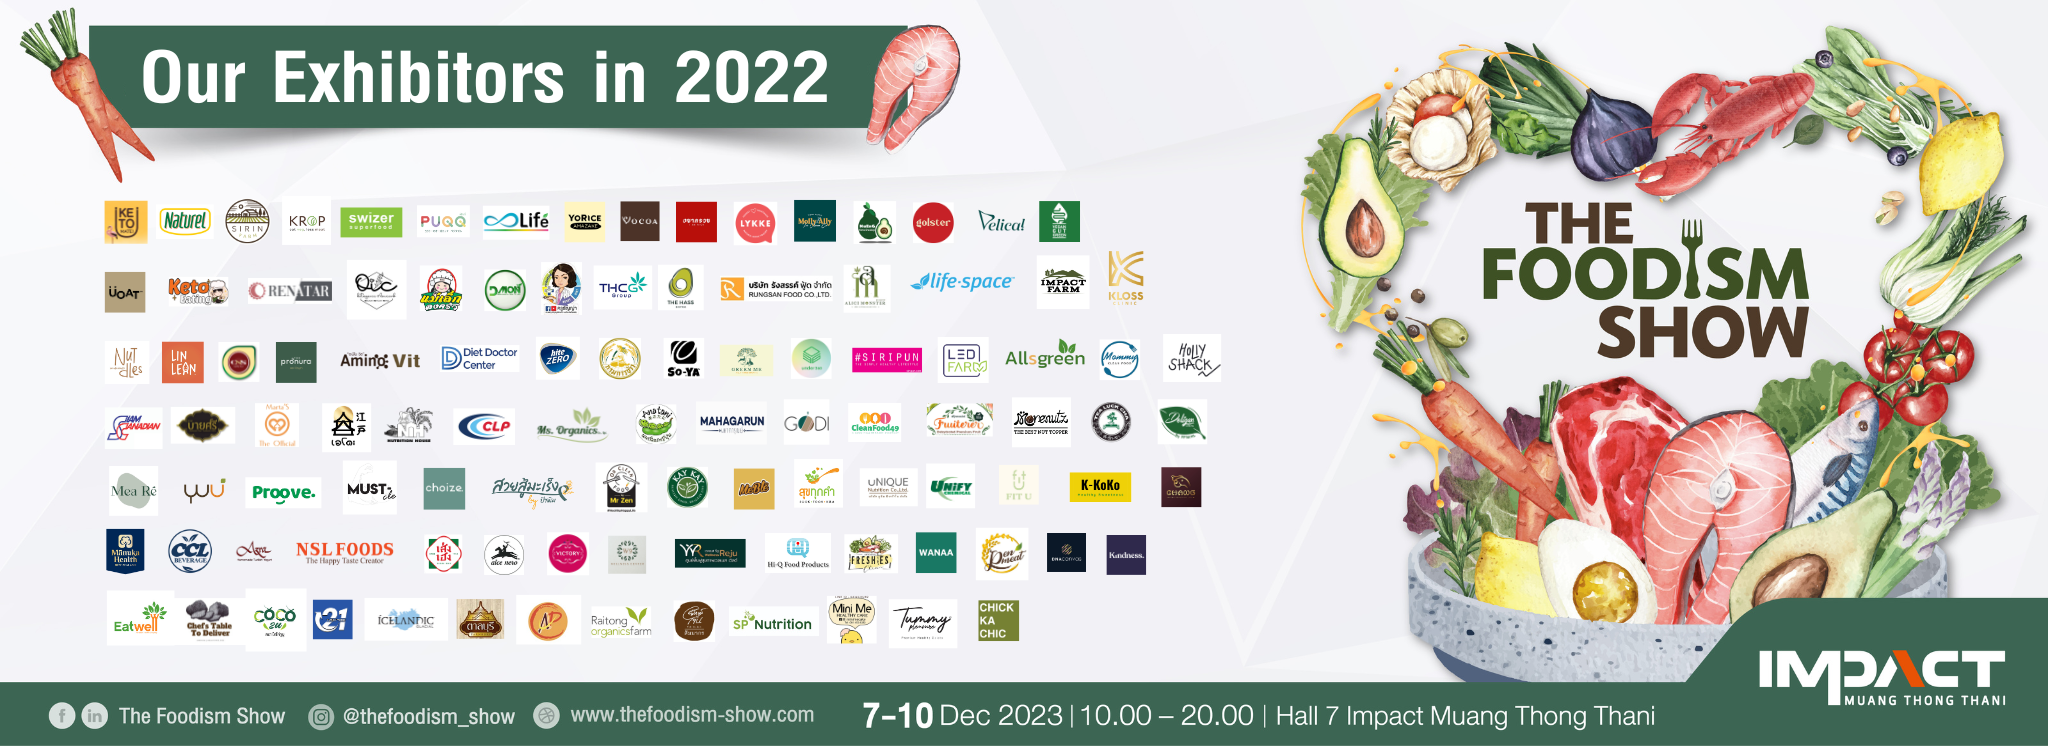 Thefoodismshow Healthy food brands 2022